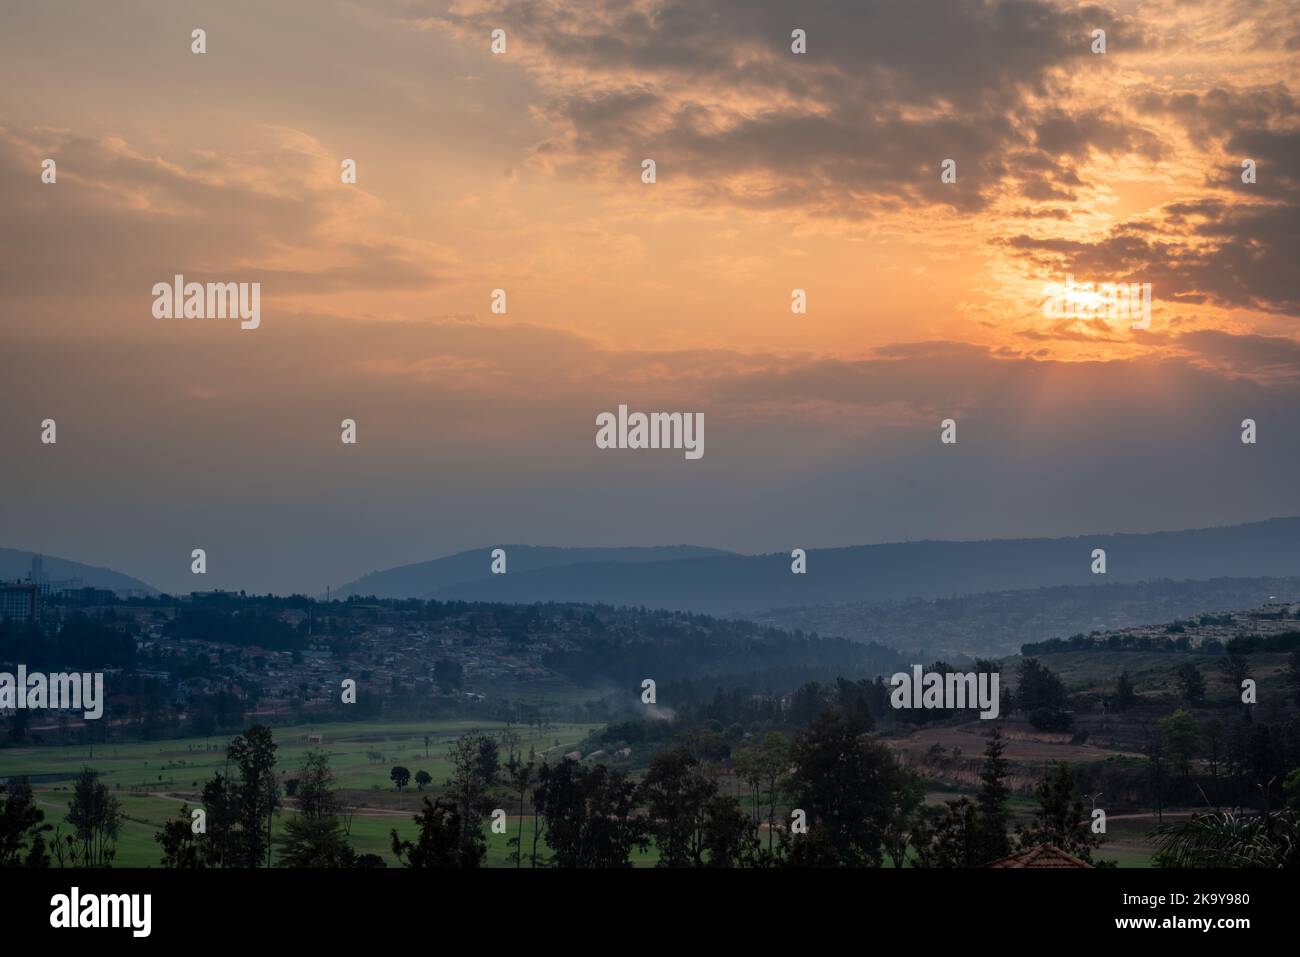 A view of the sun setting over the hills in Kigali, Rwanda Stock Photo